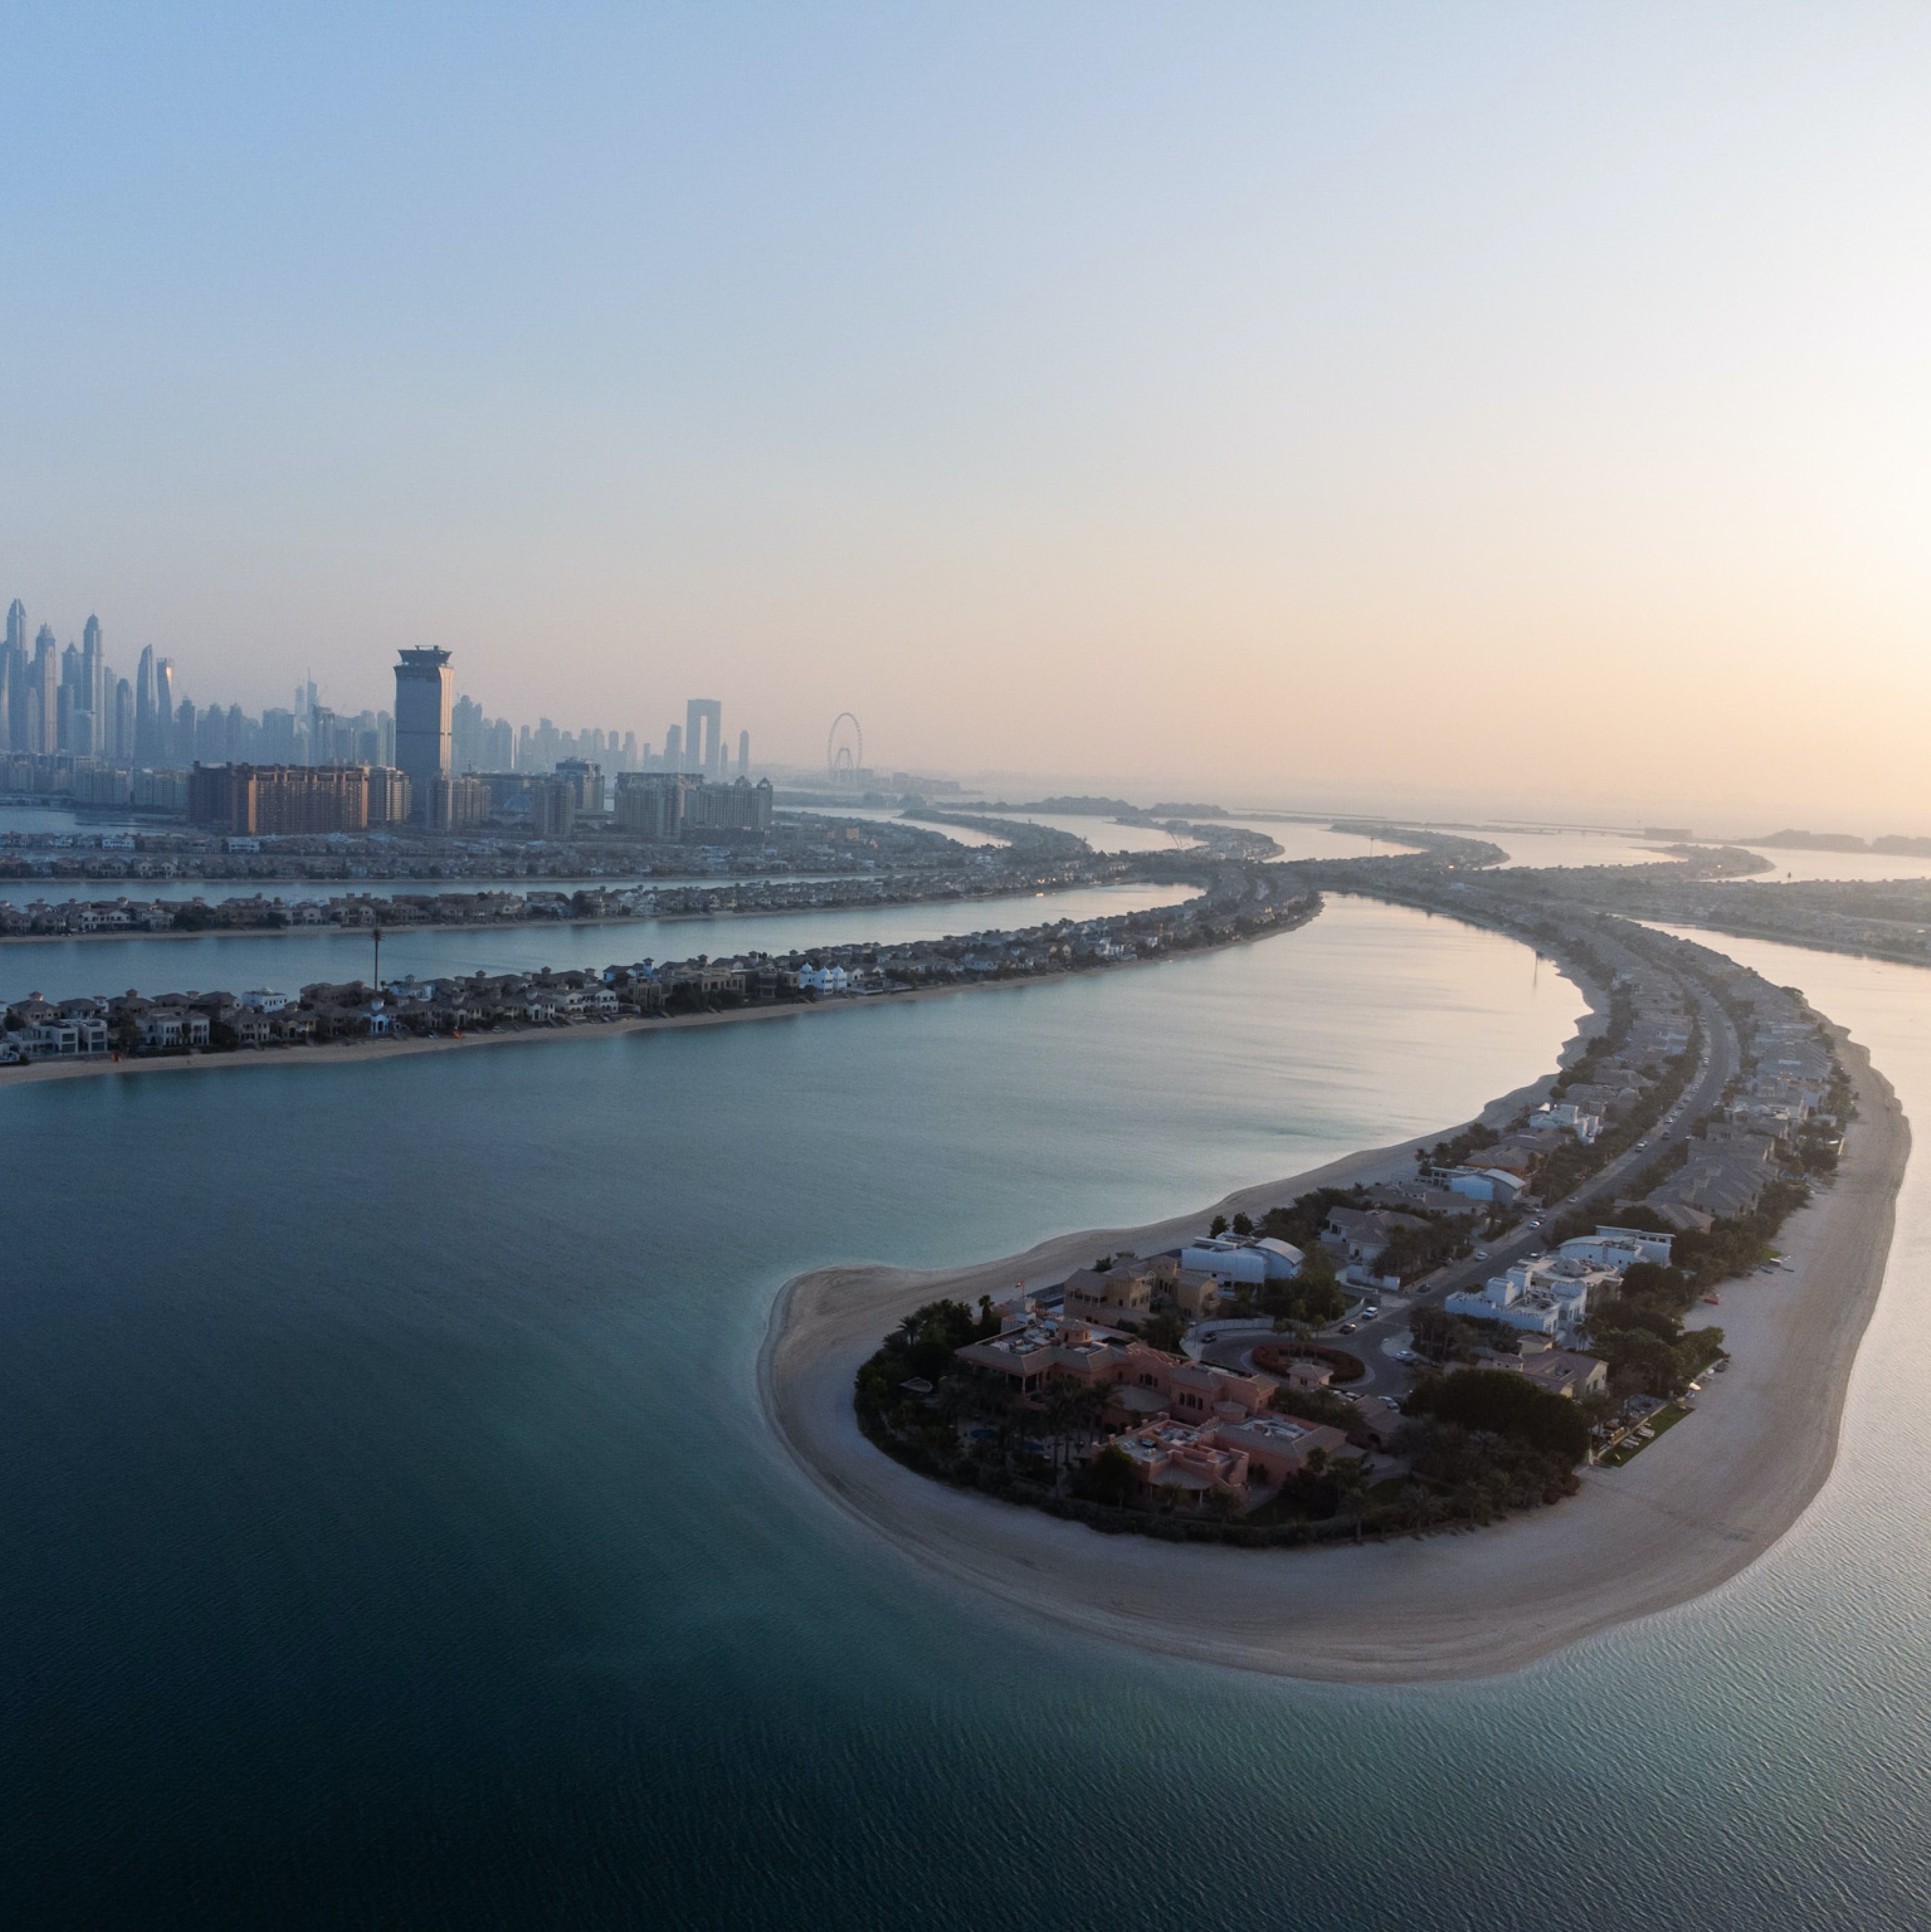 The View At The Palm Jumeirah Dubai (Private Transfer).